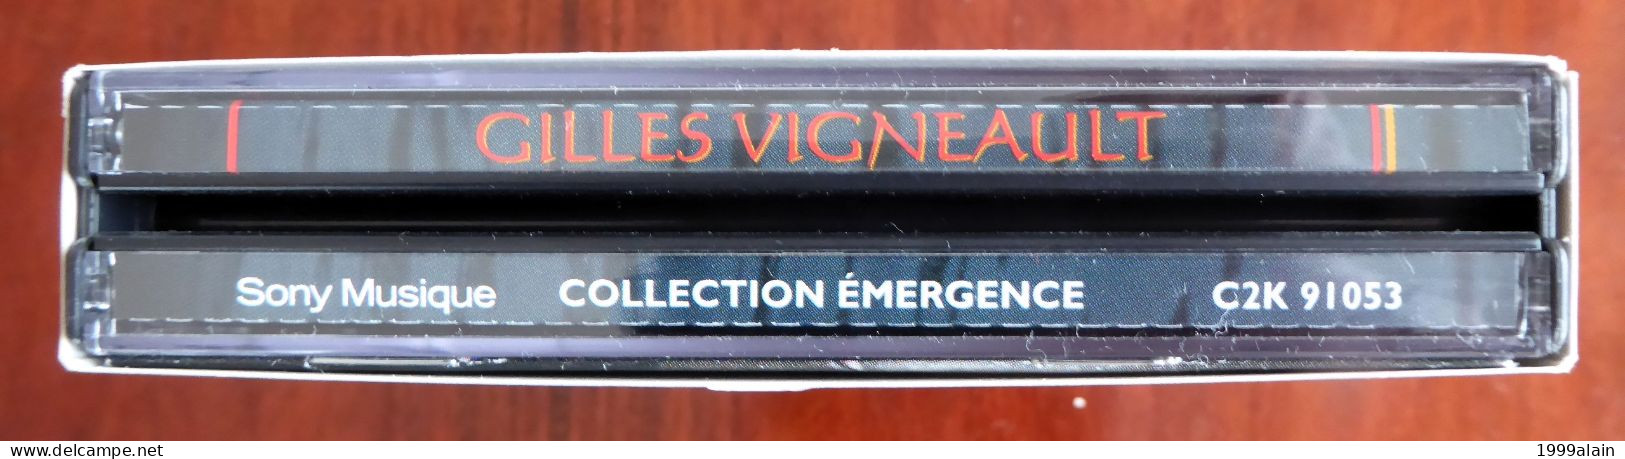 GILLES VIGNEAULT - COLLECTION EMERGENCE - 2 CD - 49 TITRES - Hit-Compilations